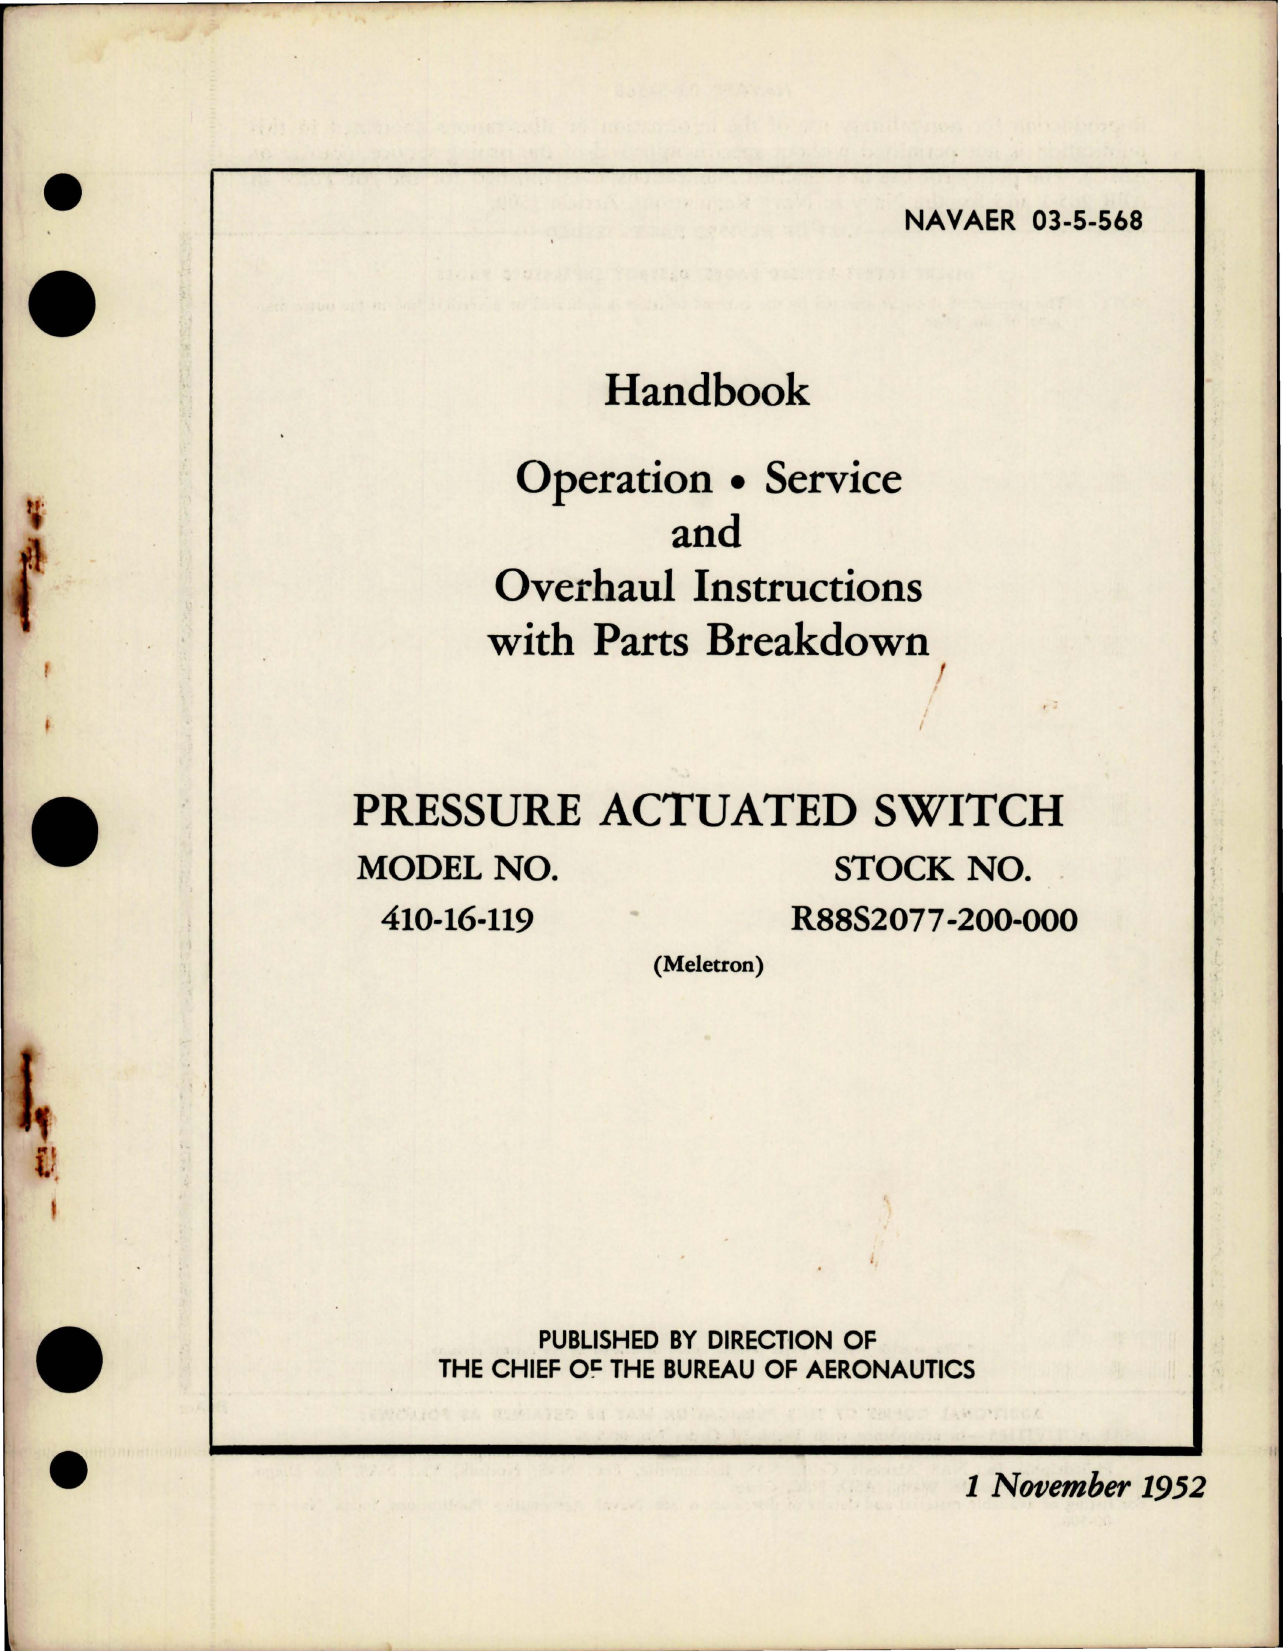 Sample page 1 from AirCorps Library document: Operation, Service, Overhaul, and Parts for Pressure Actuated Switch - Model 410-16-119 